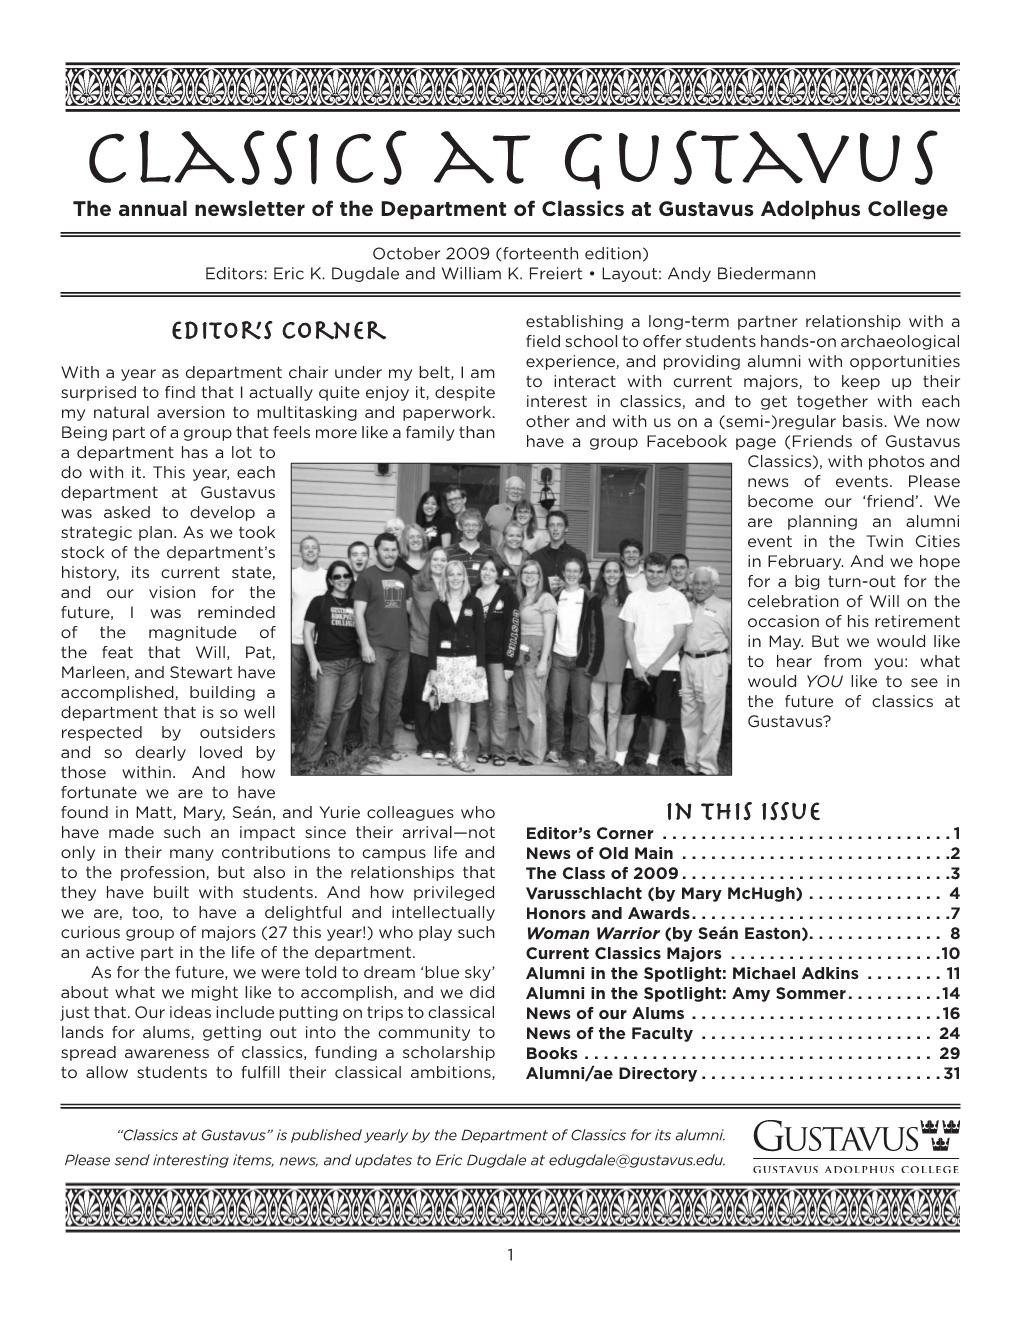 Classics at Gustavus the Annual Newsletter of the Department of Classics at Gustavus Adolphus College